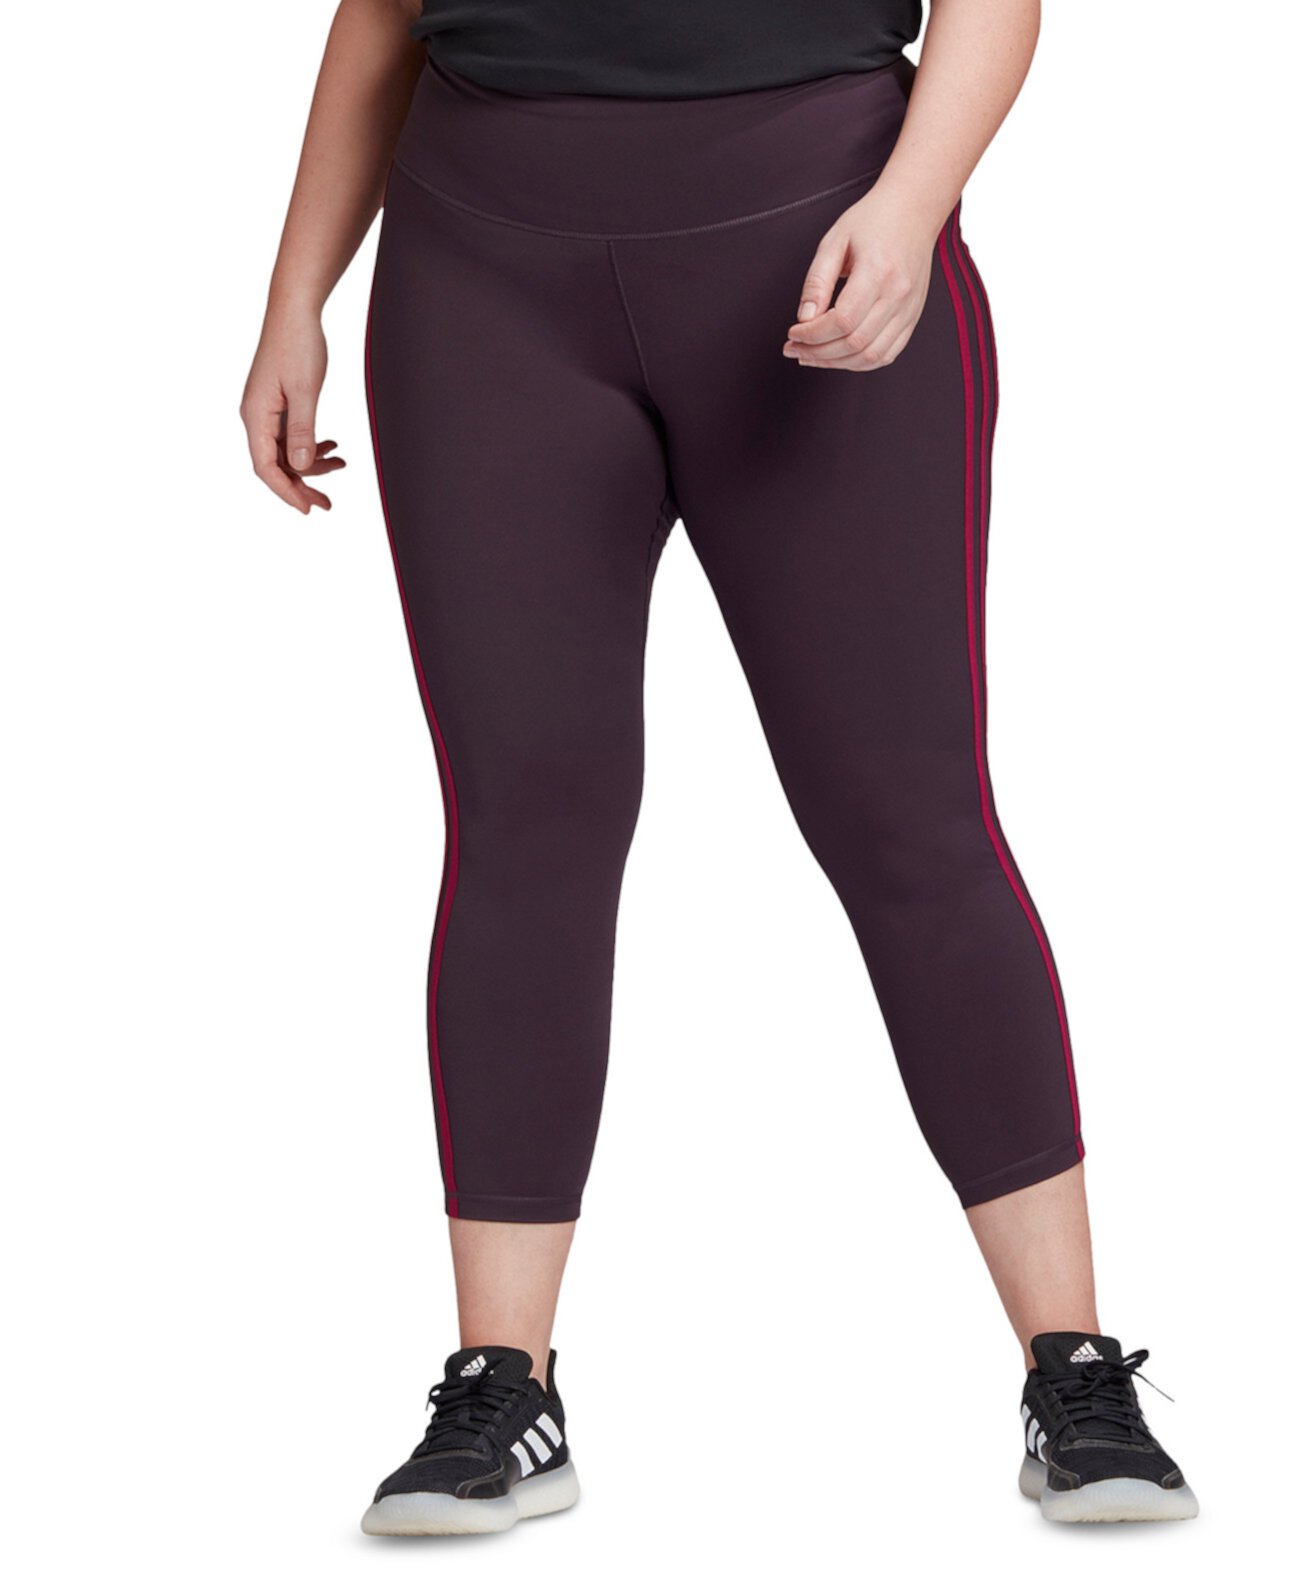 Plus Size Believe This 7/8 Tights Adidas